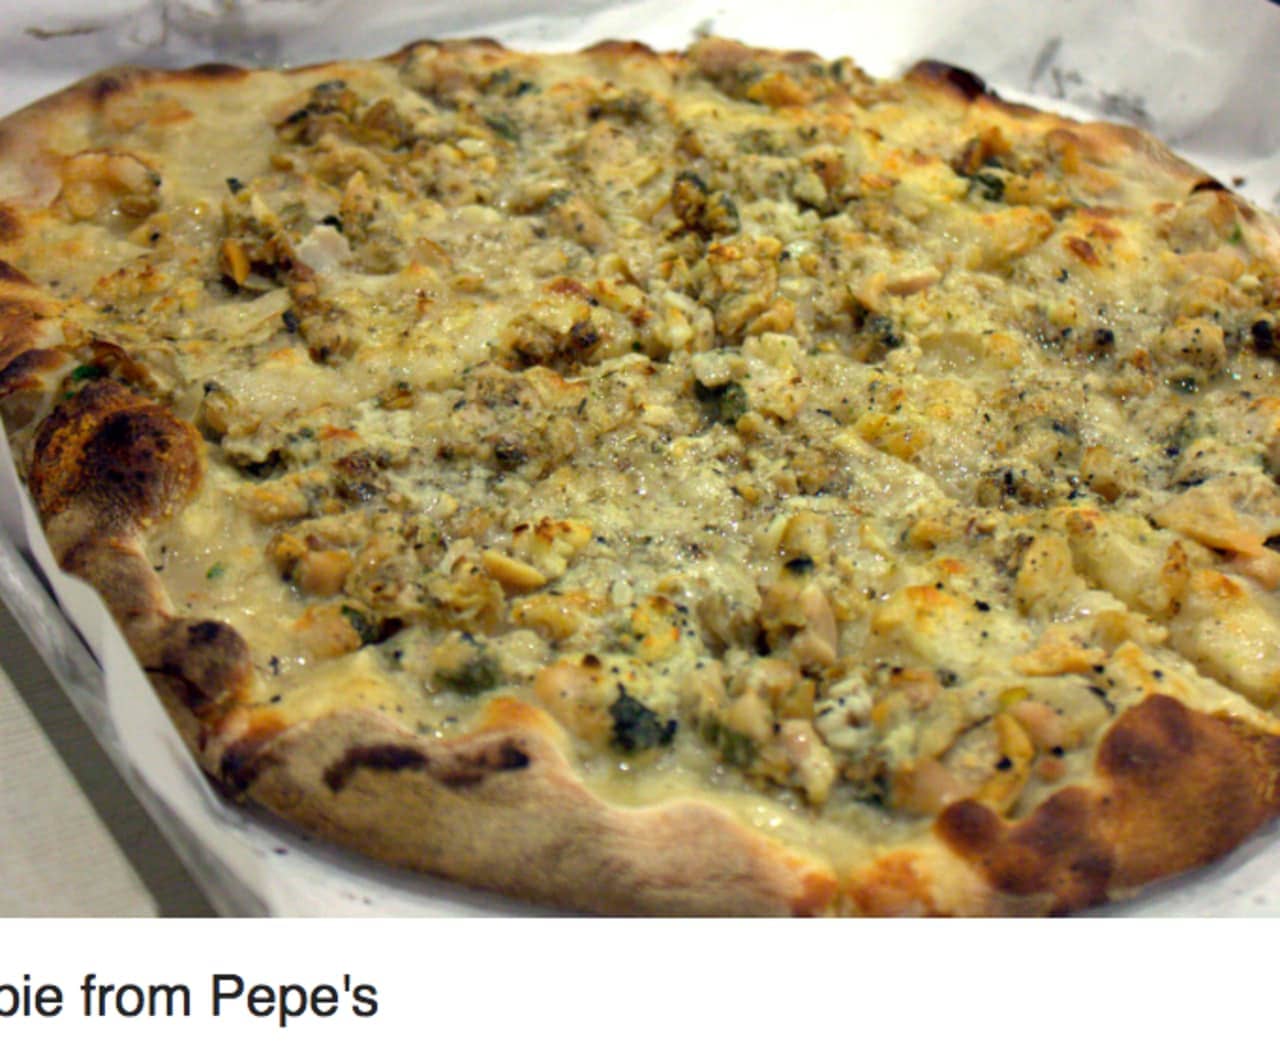 A white clam pizza pie from Frank Pepe's Pizzaria.